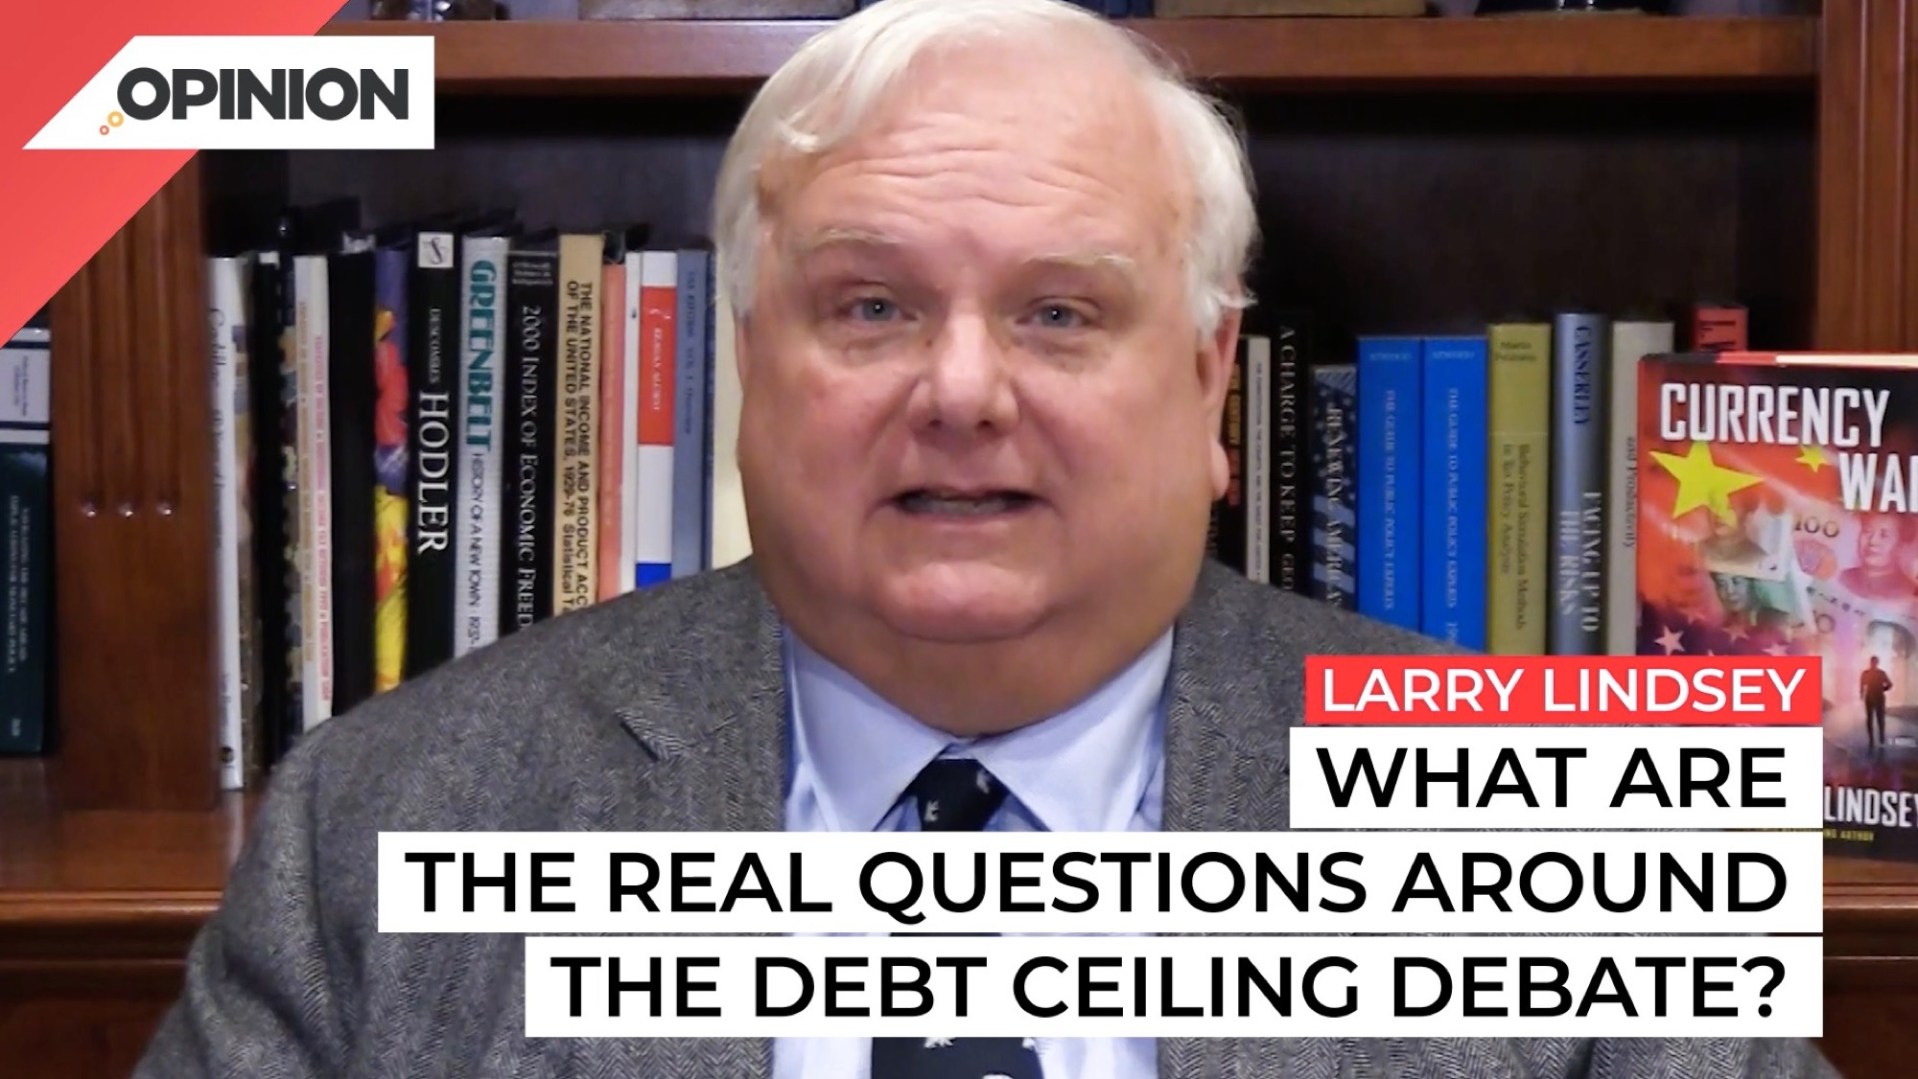 Larry Lindsey discusses the debt ceiling